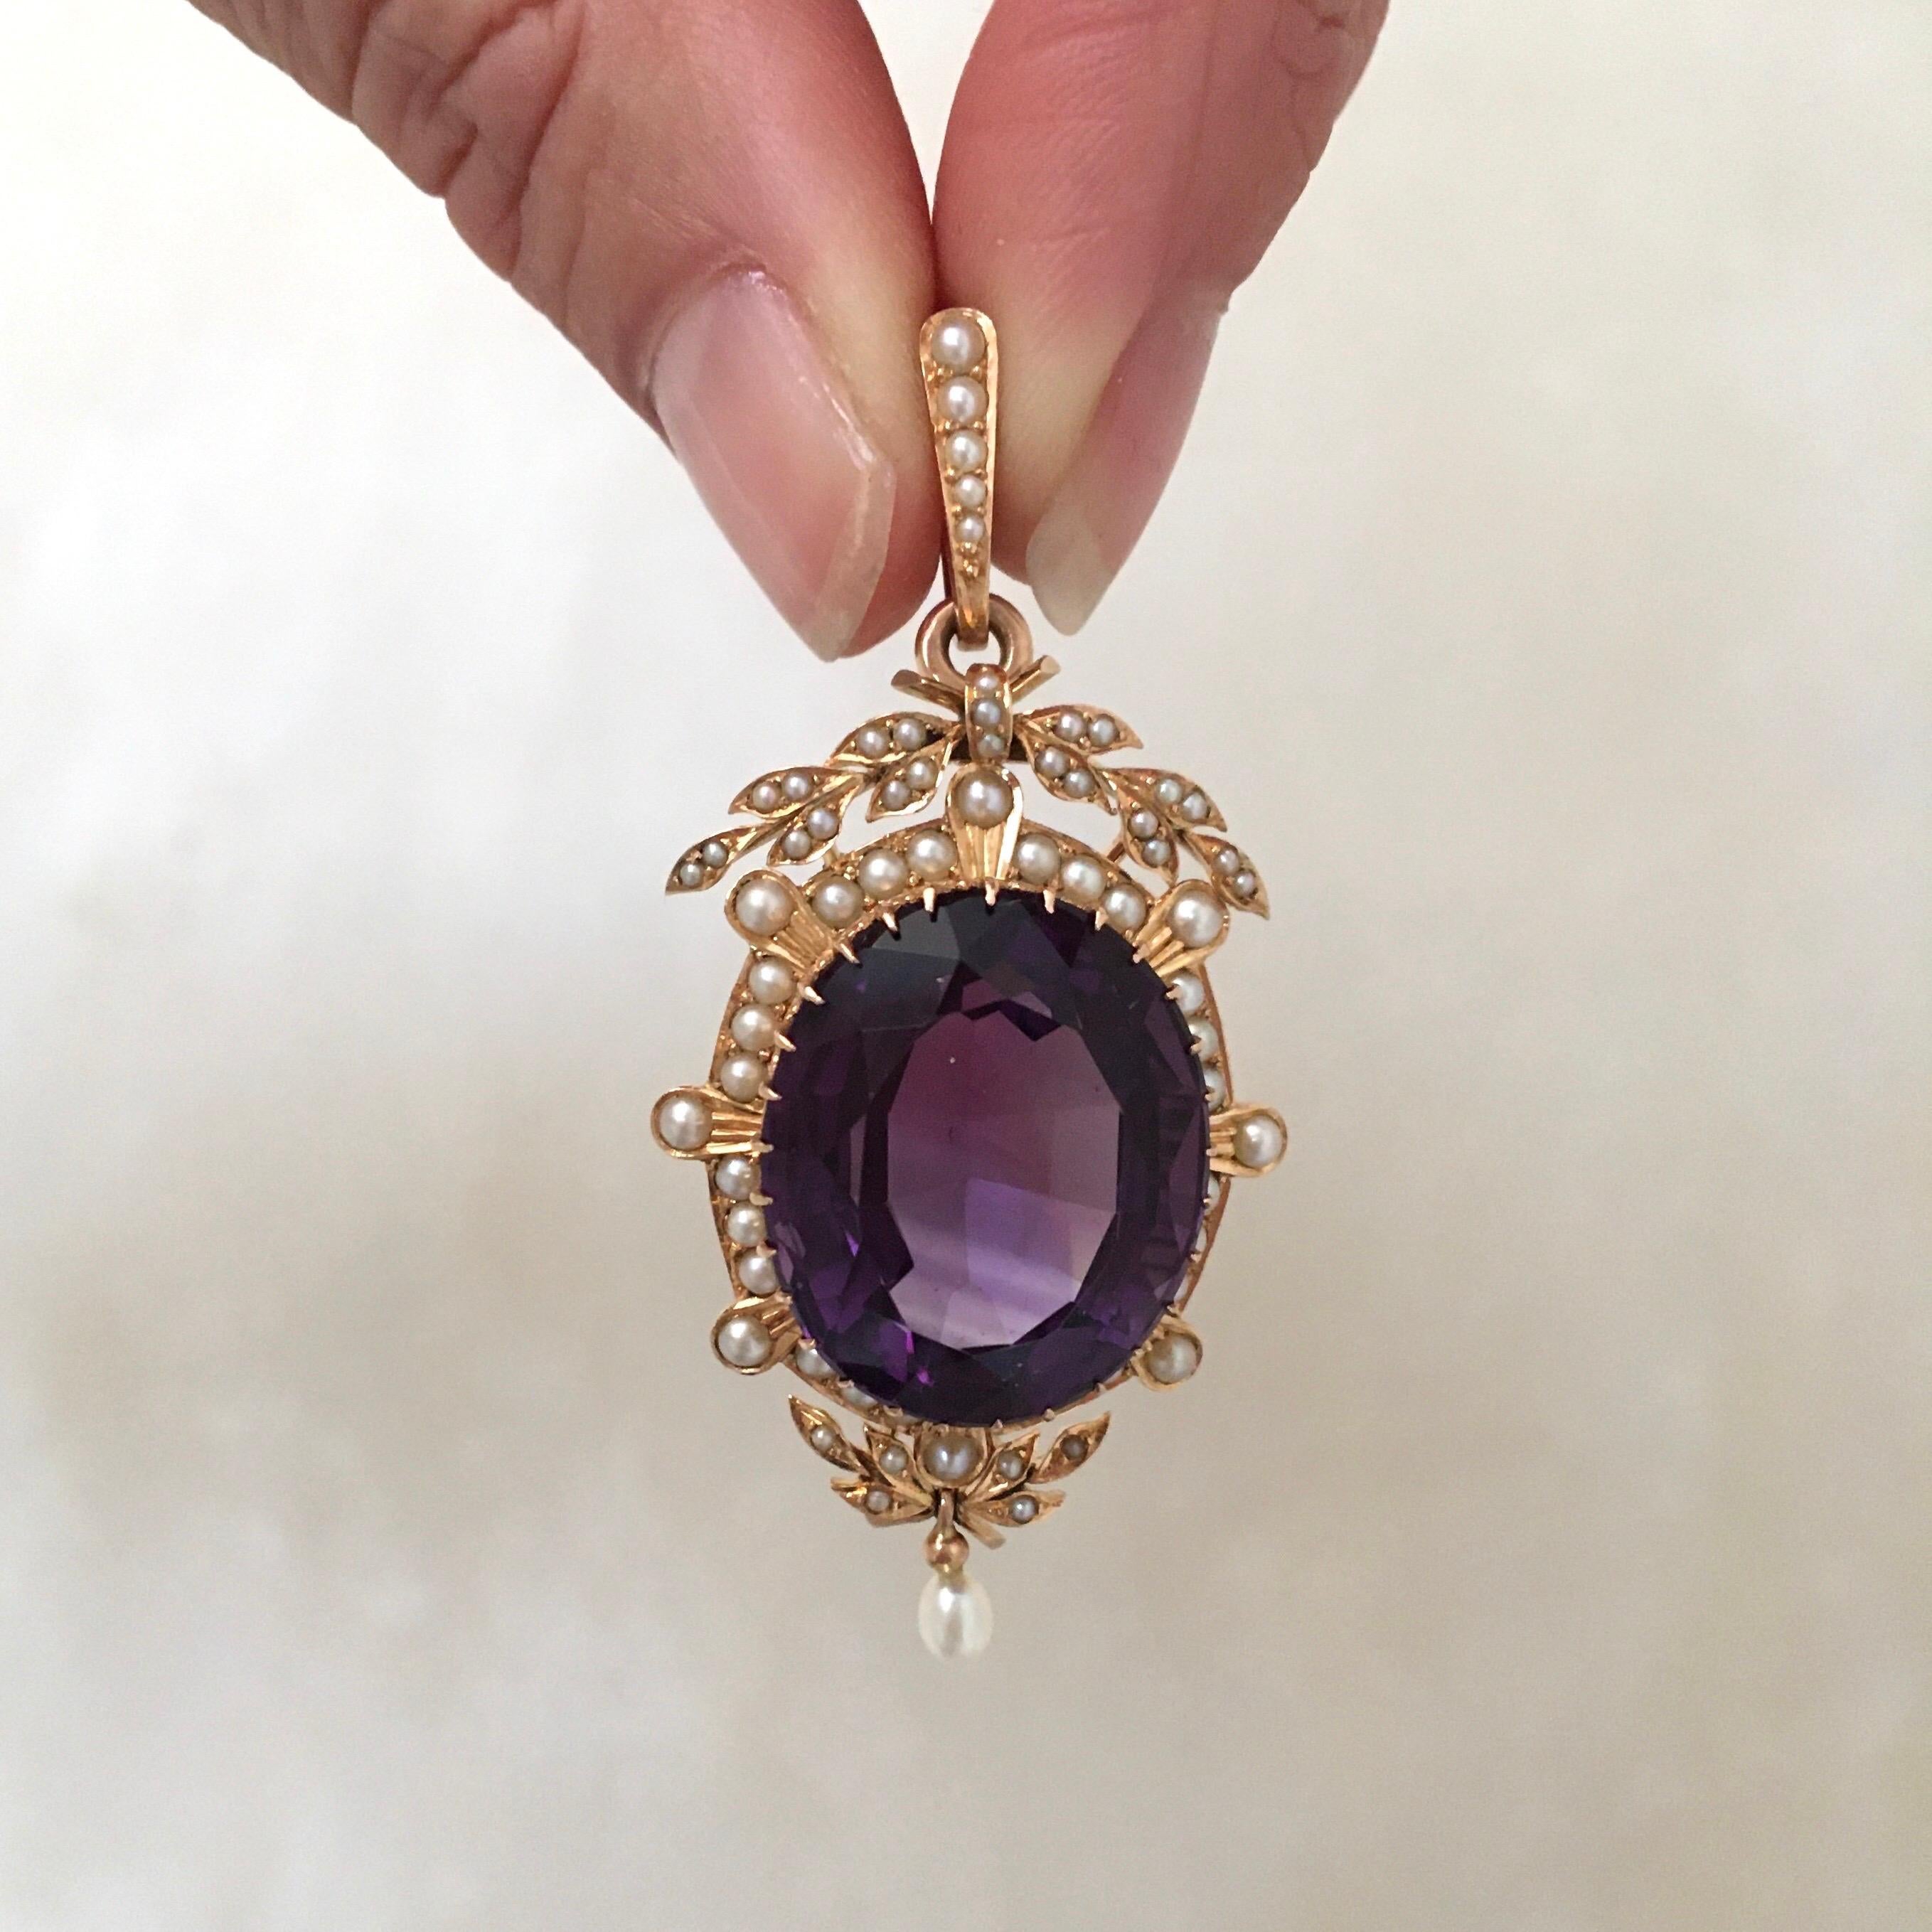 Oval Cut Amethyst and Pearls 14K Gold Pendant